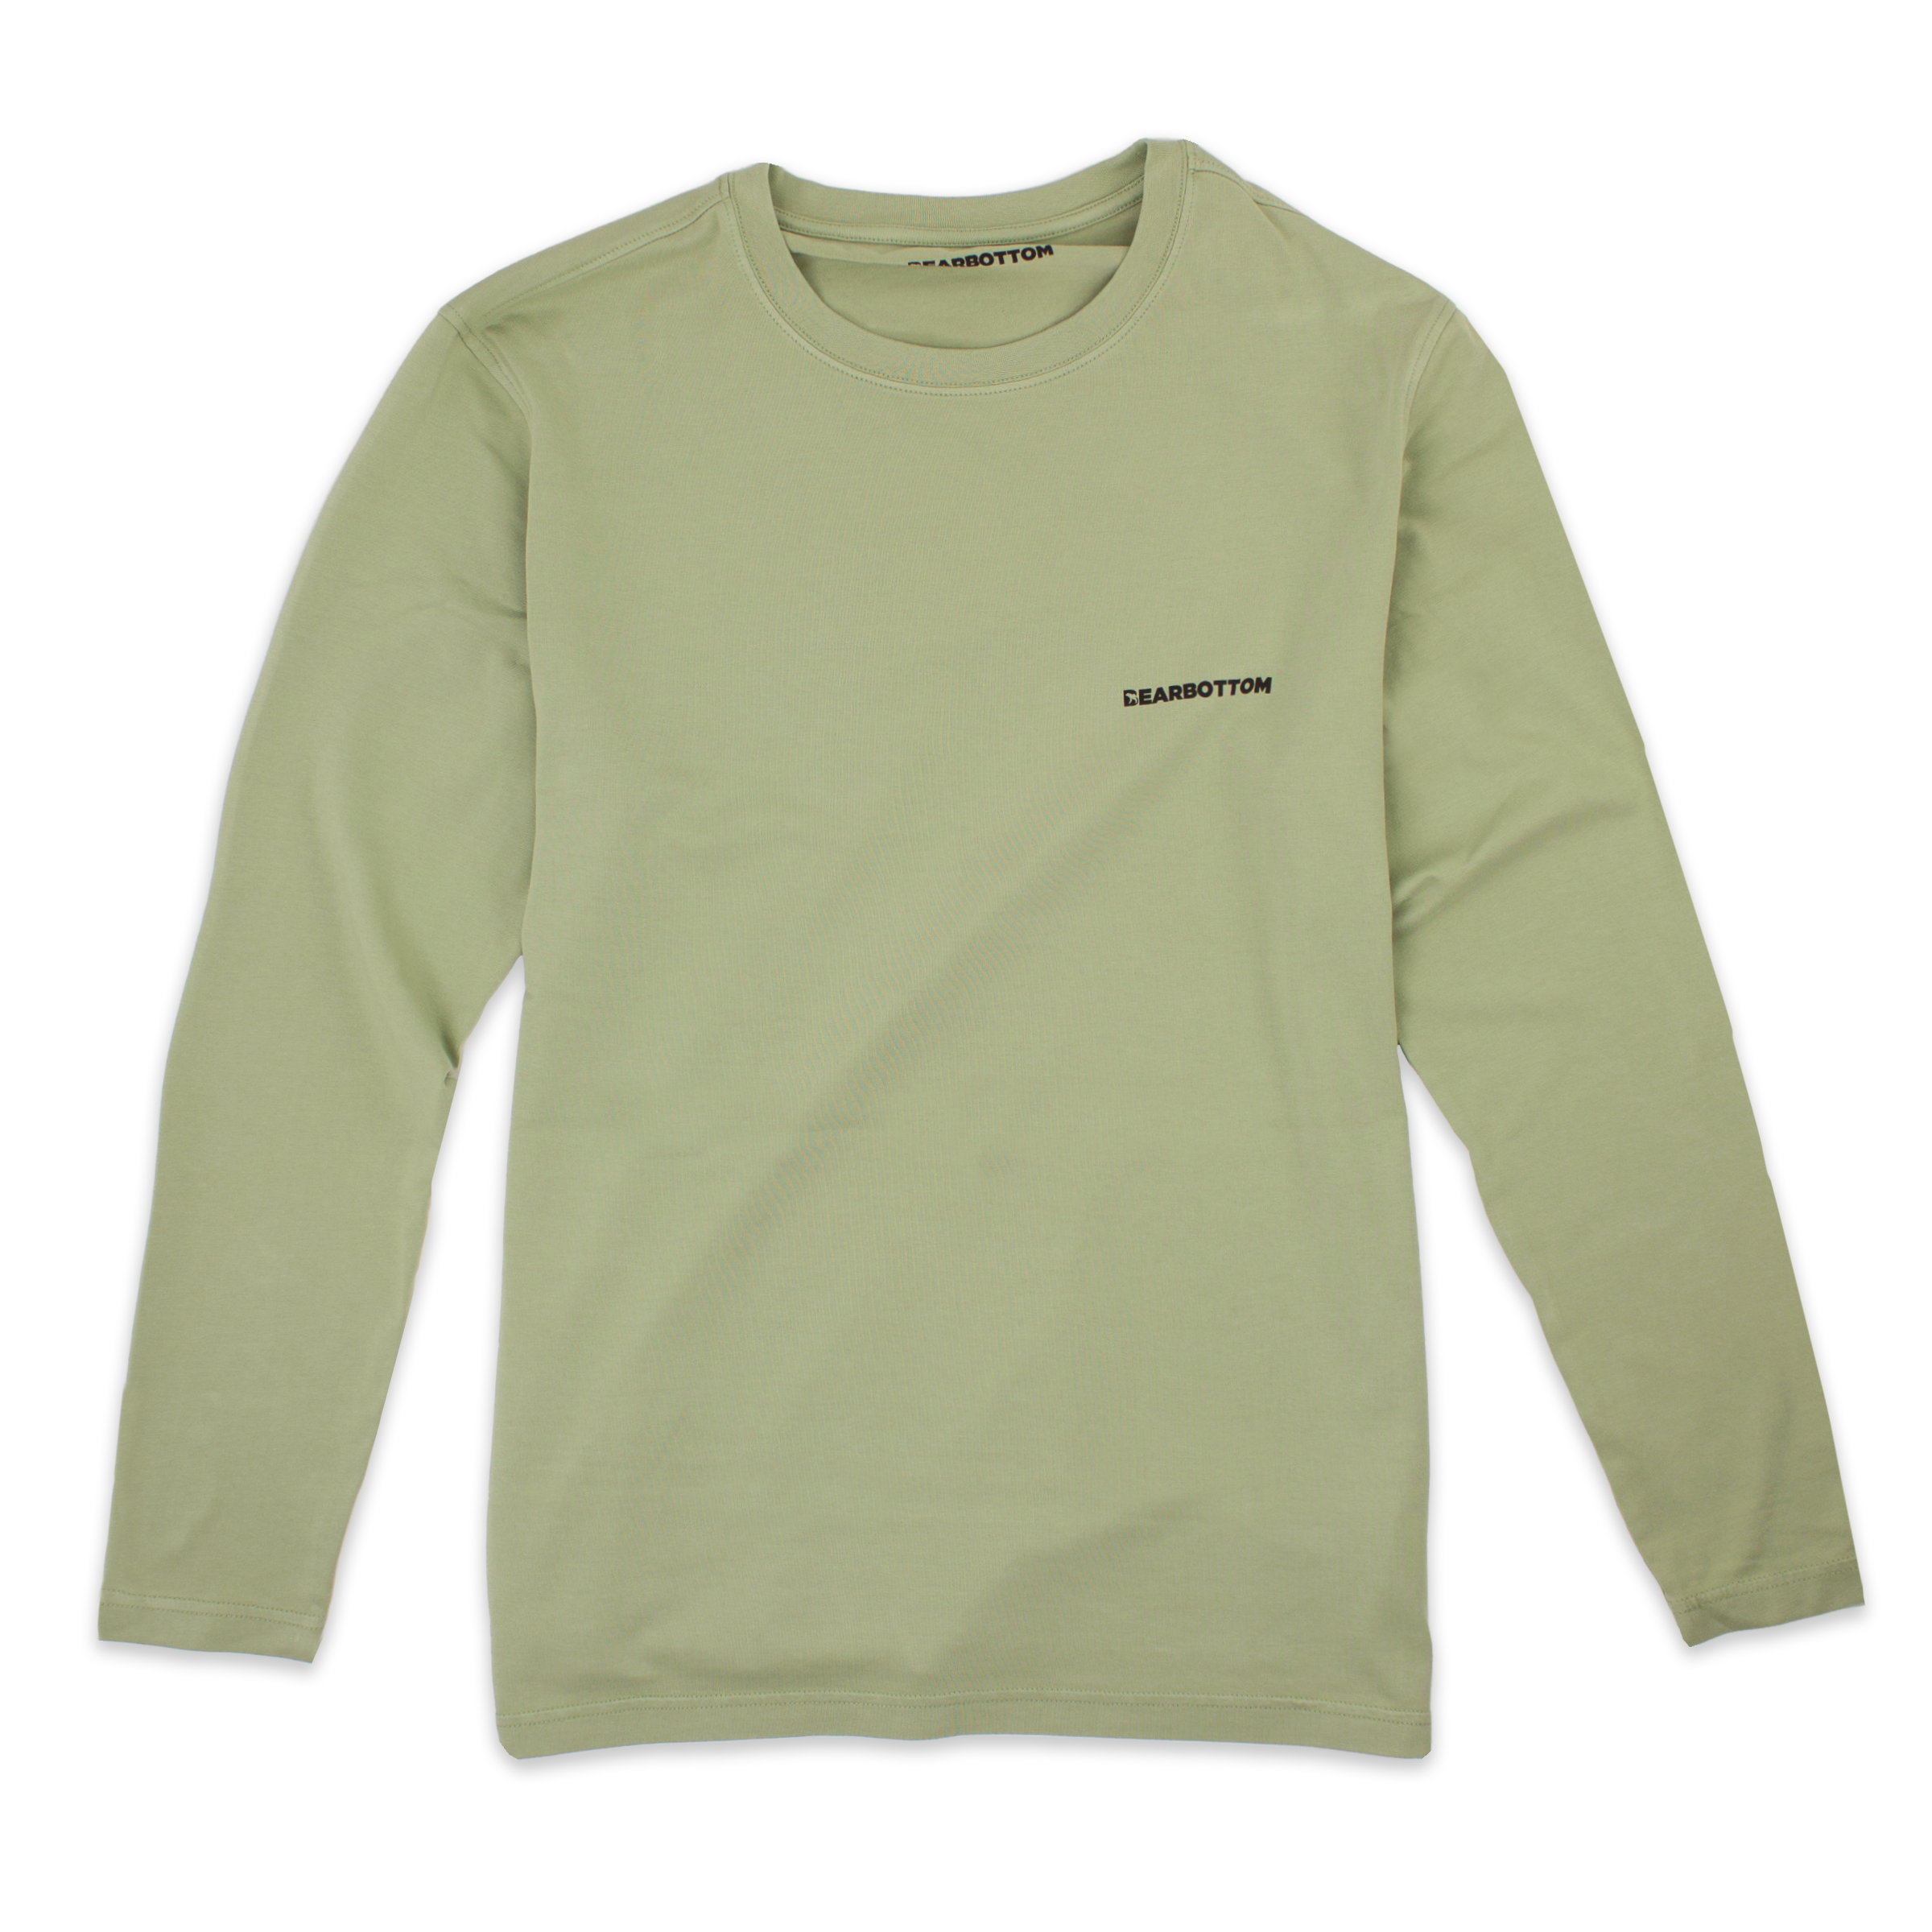 Natural Dye Logo Long Sleeve Tee in Sage green with Crewneck and Bearbottom printed in black on front left chest